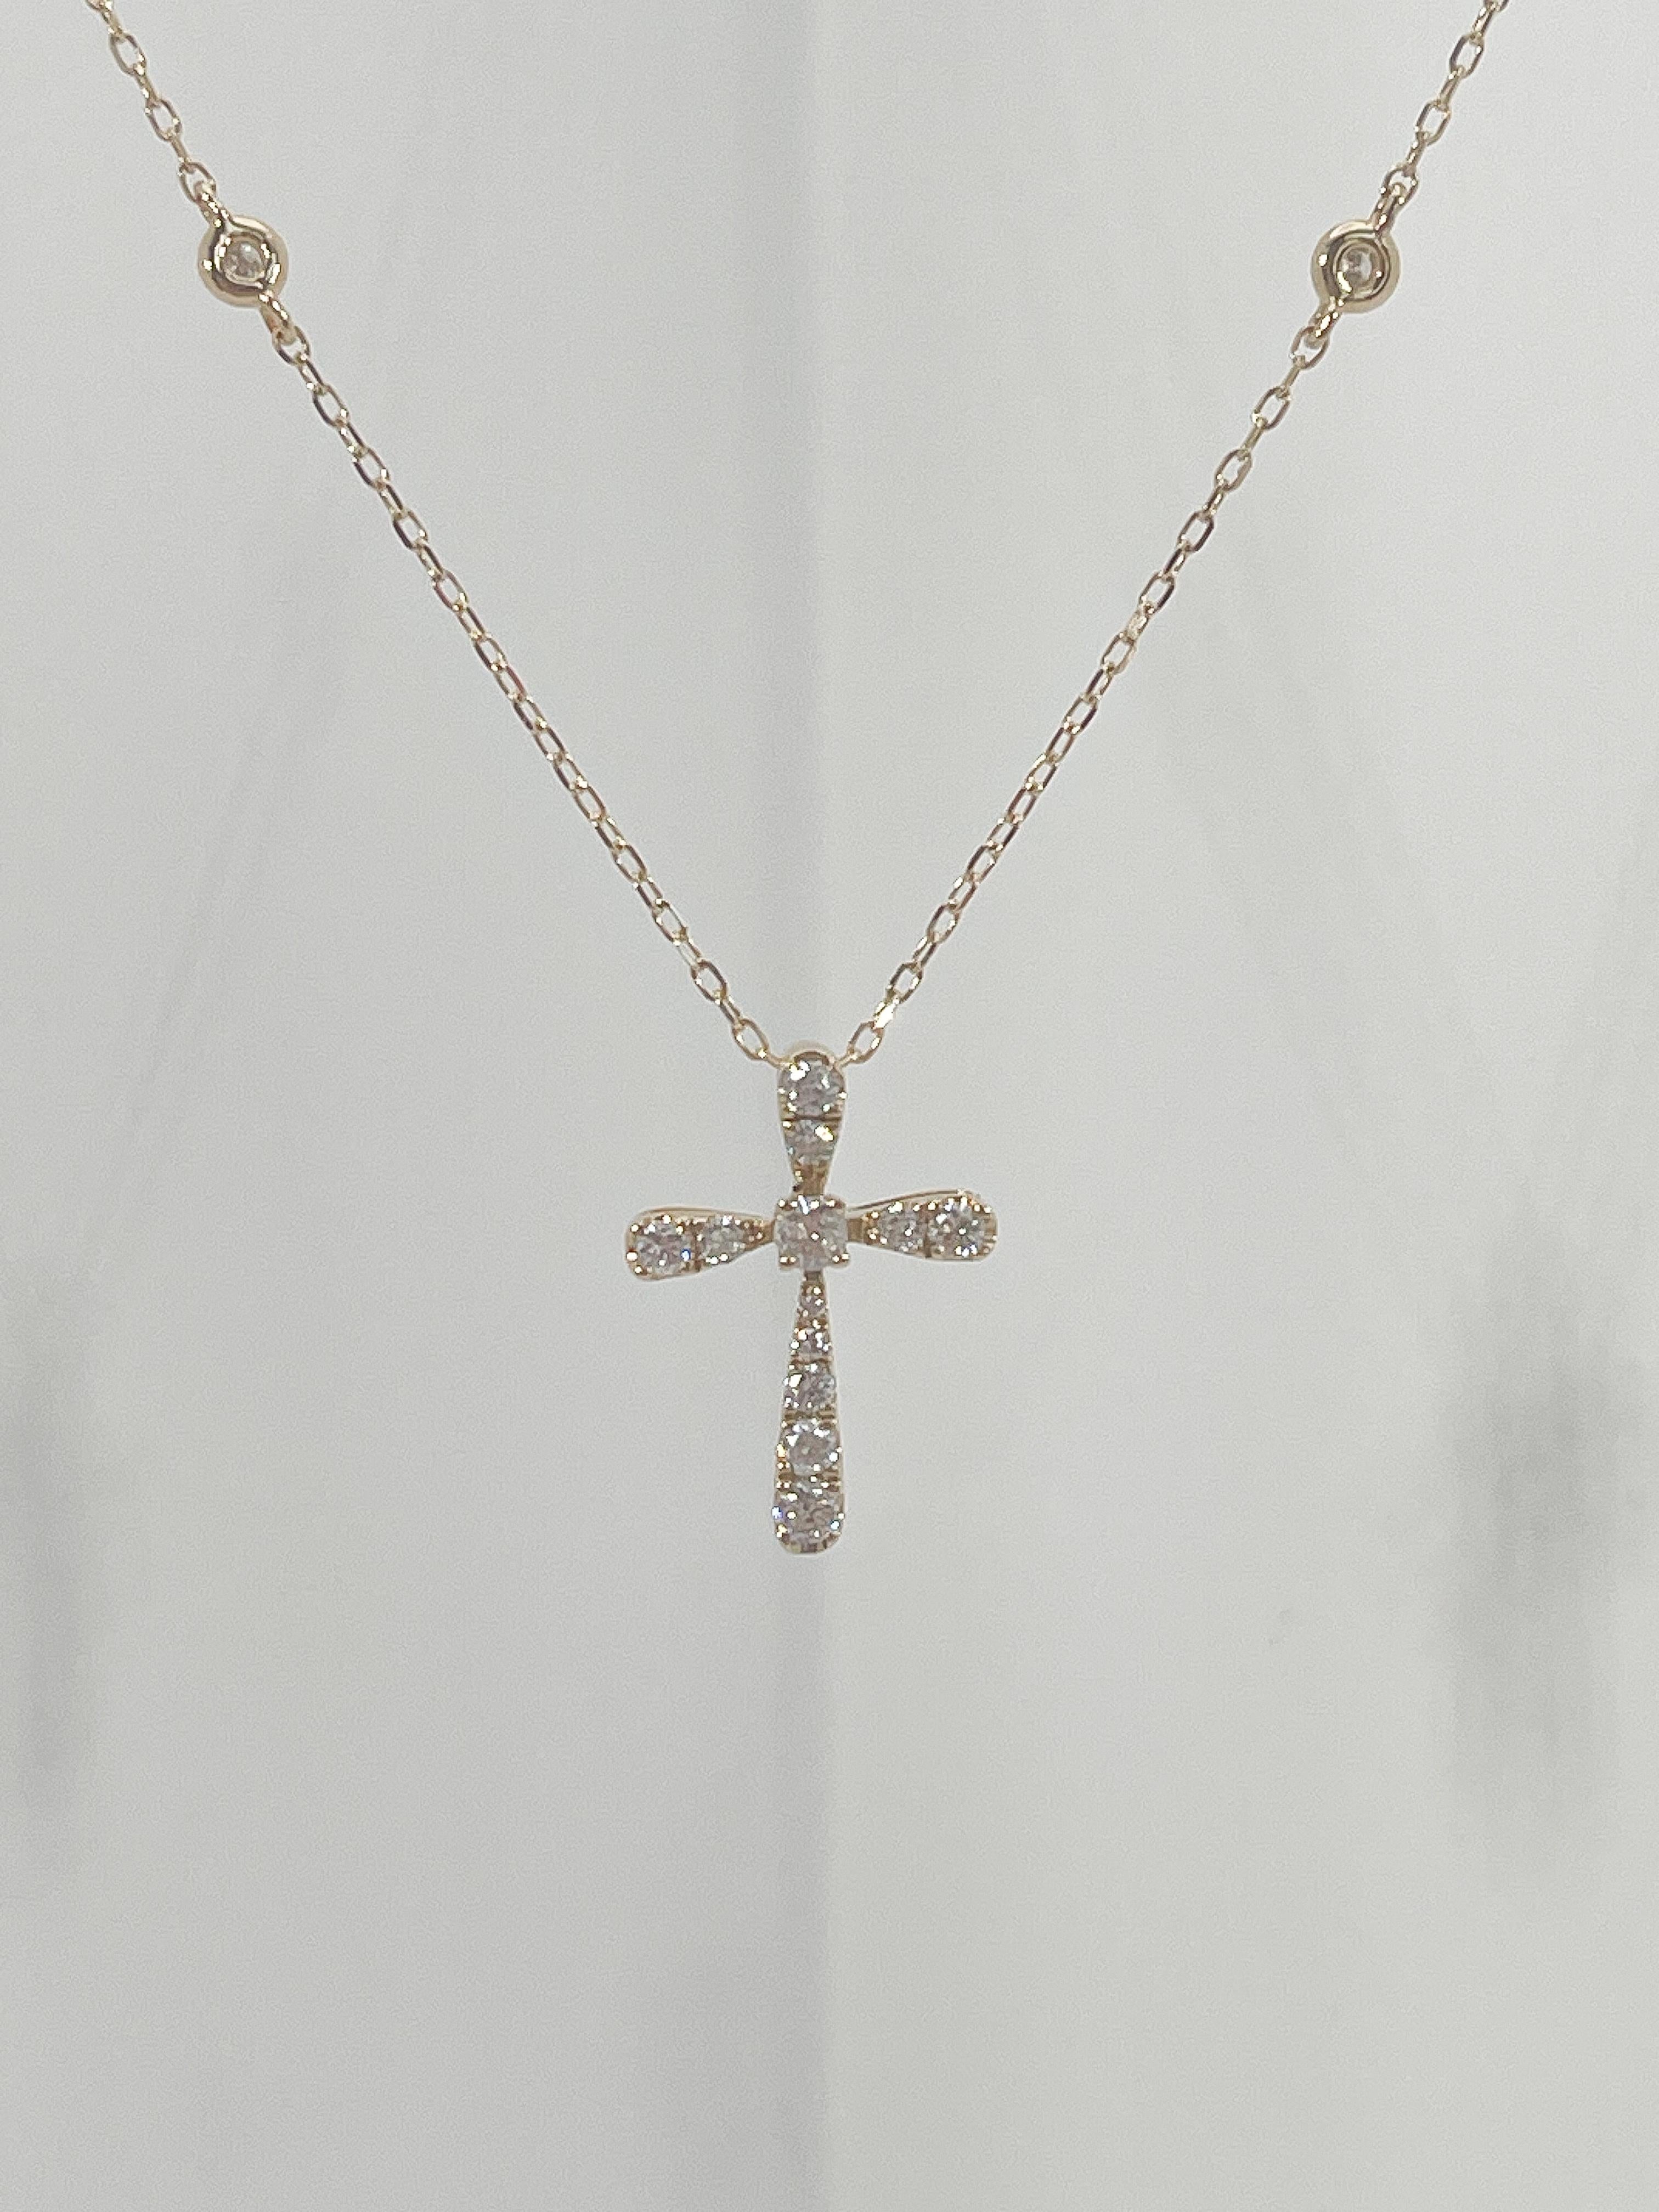 Women's 14K Yellow Gold .22 CTW Diamond Cross Pendant Necklace with Diamond Stations For Sale